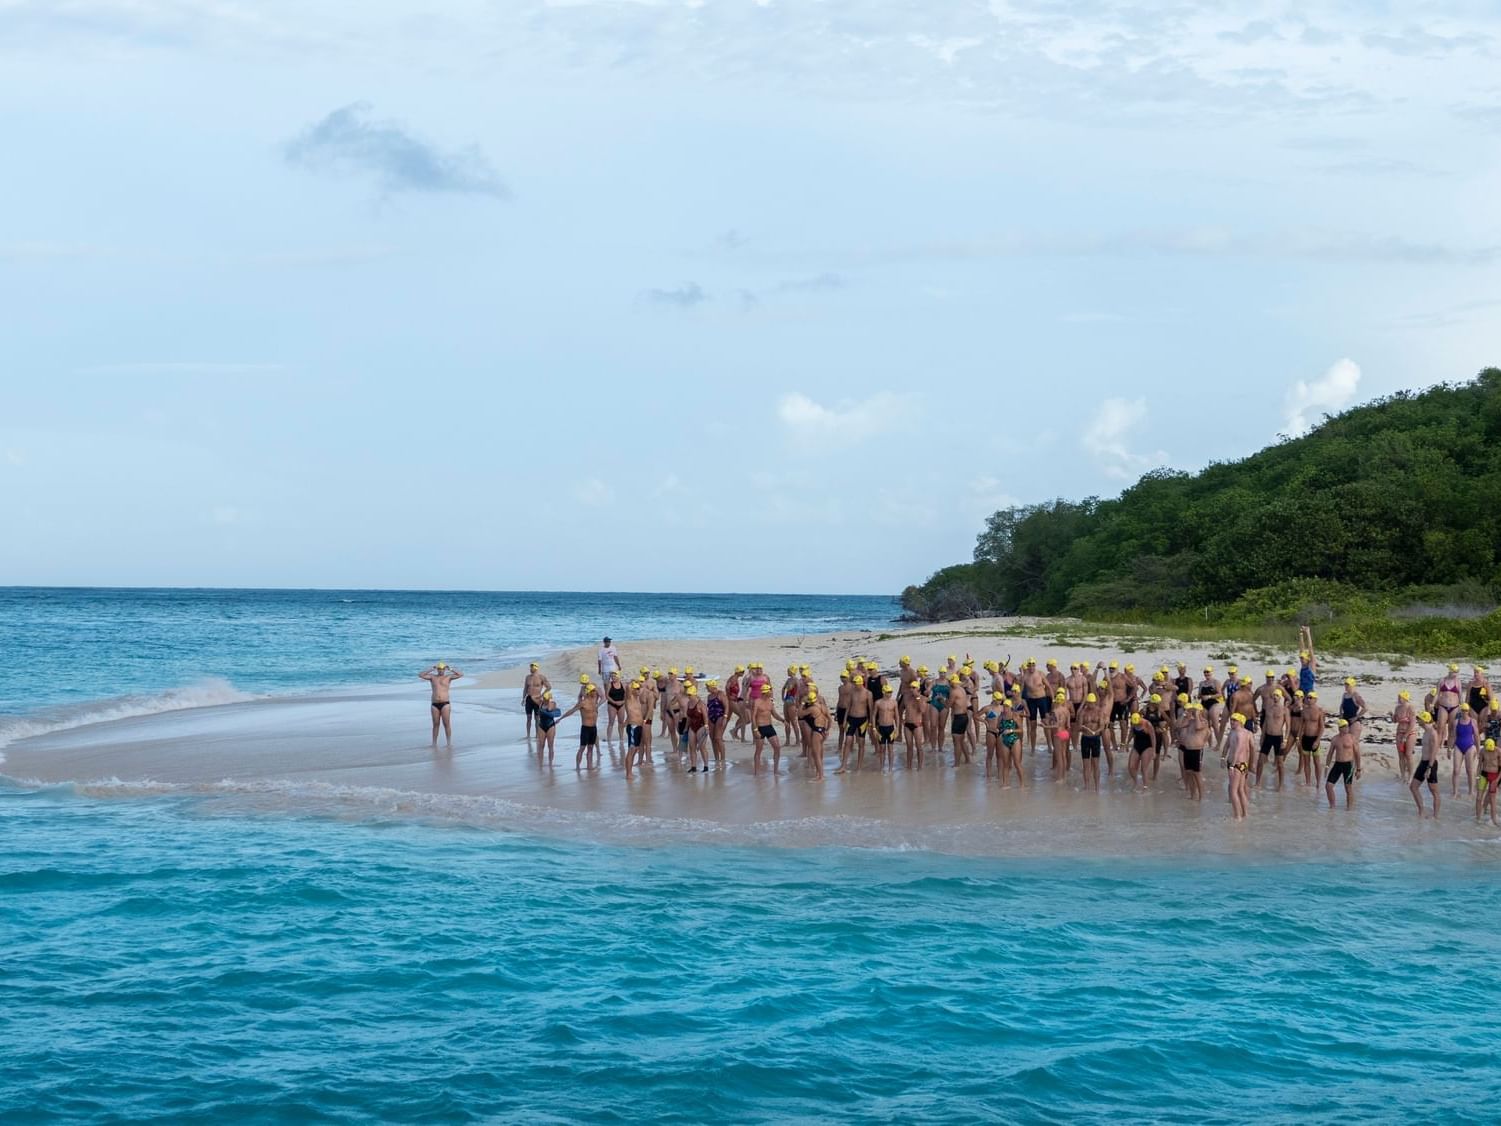 People gathered for the Coral Reef Swim Race at The Buccaneer